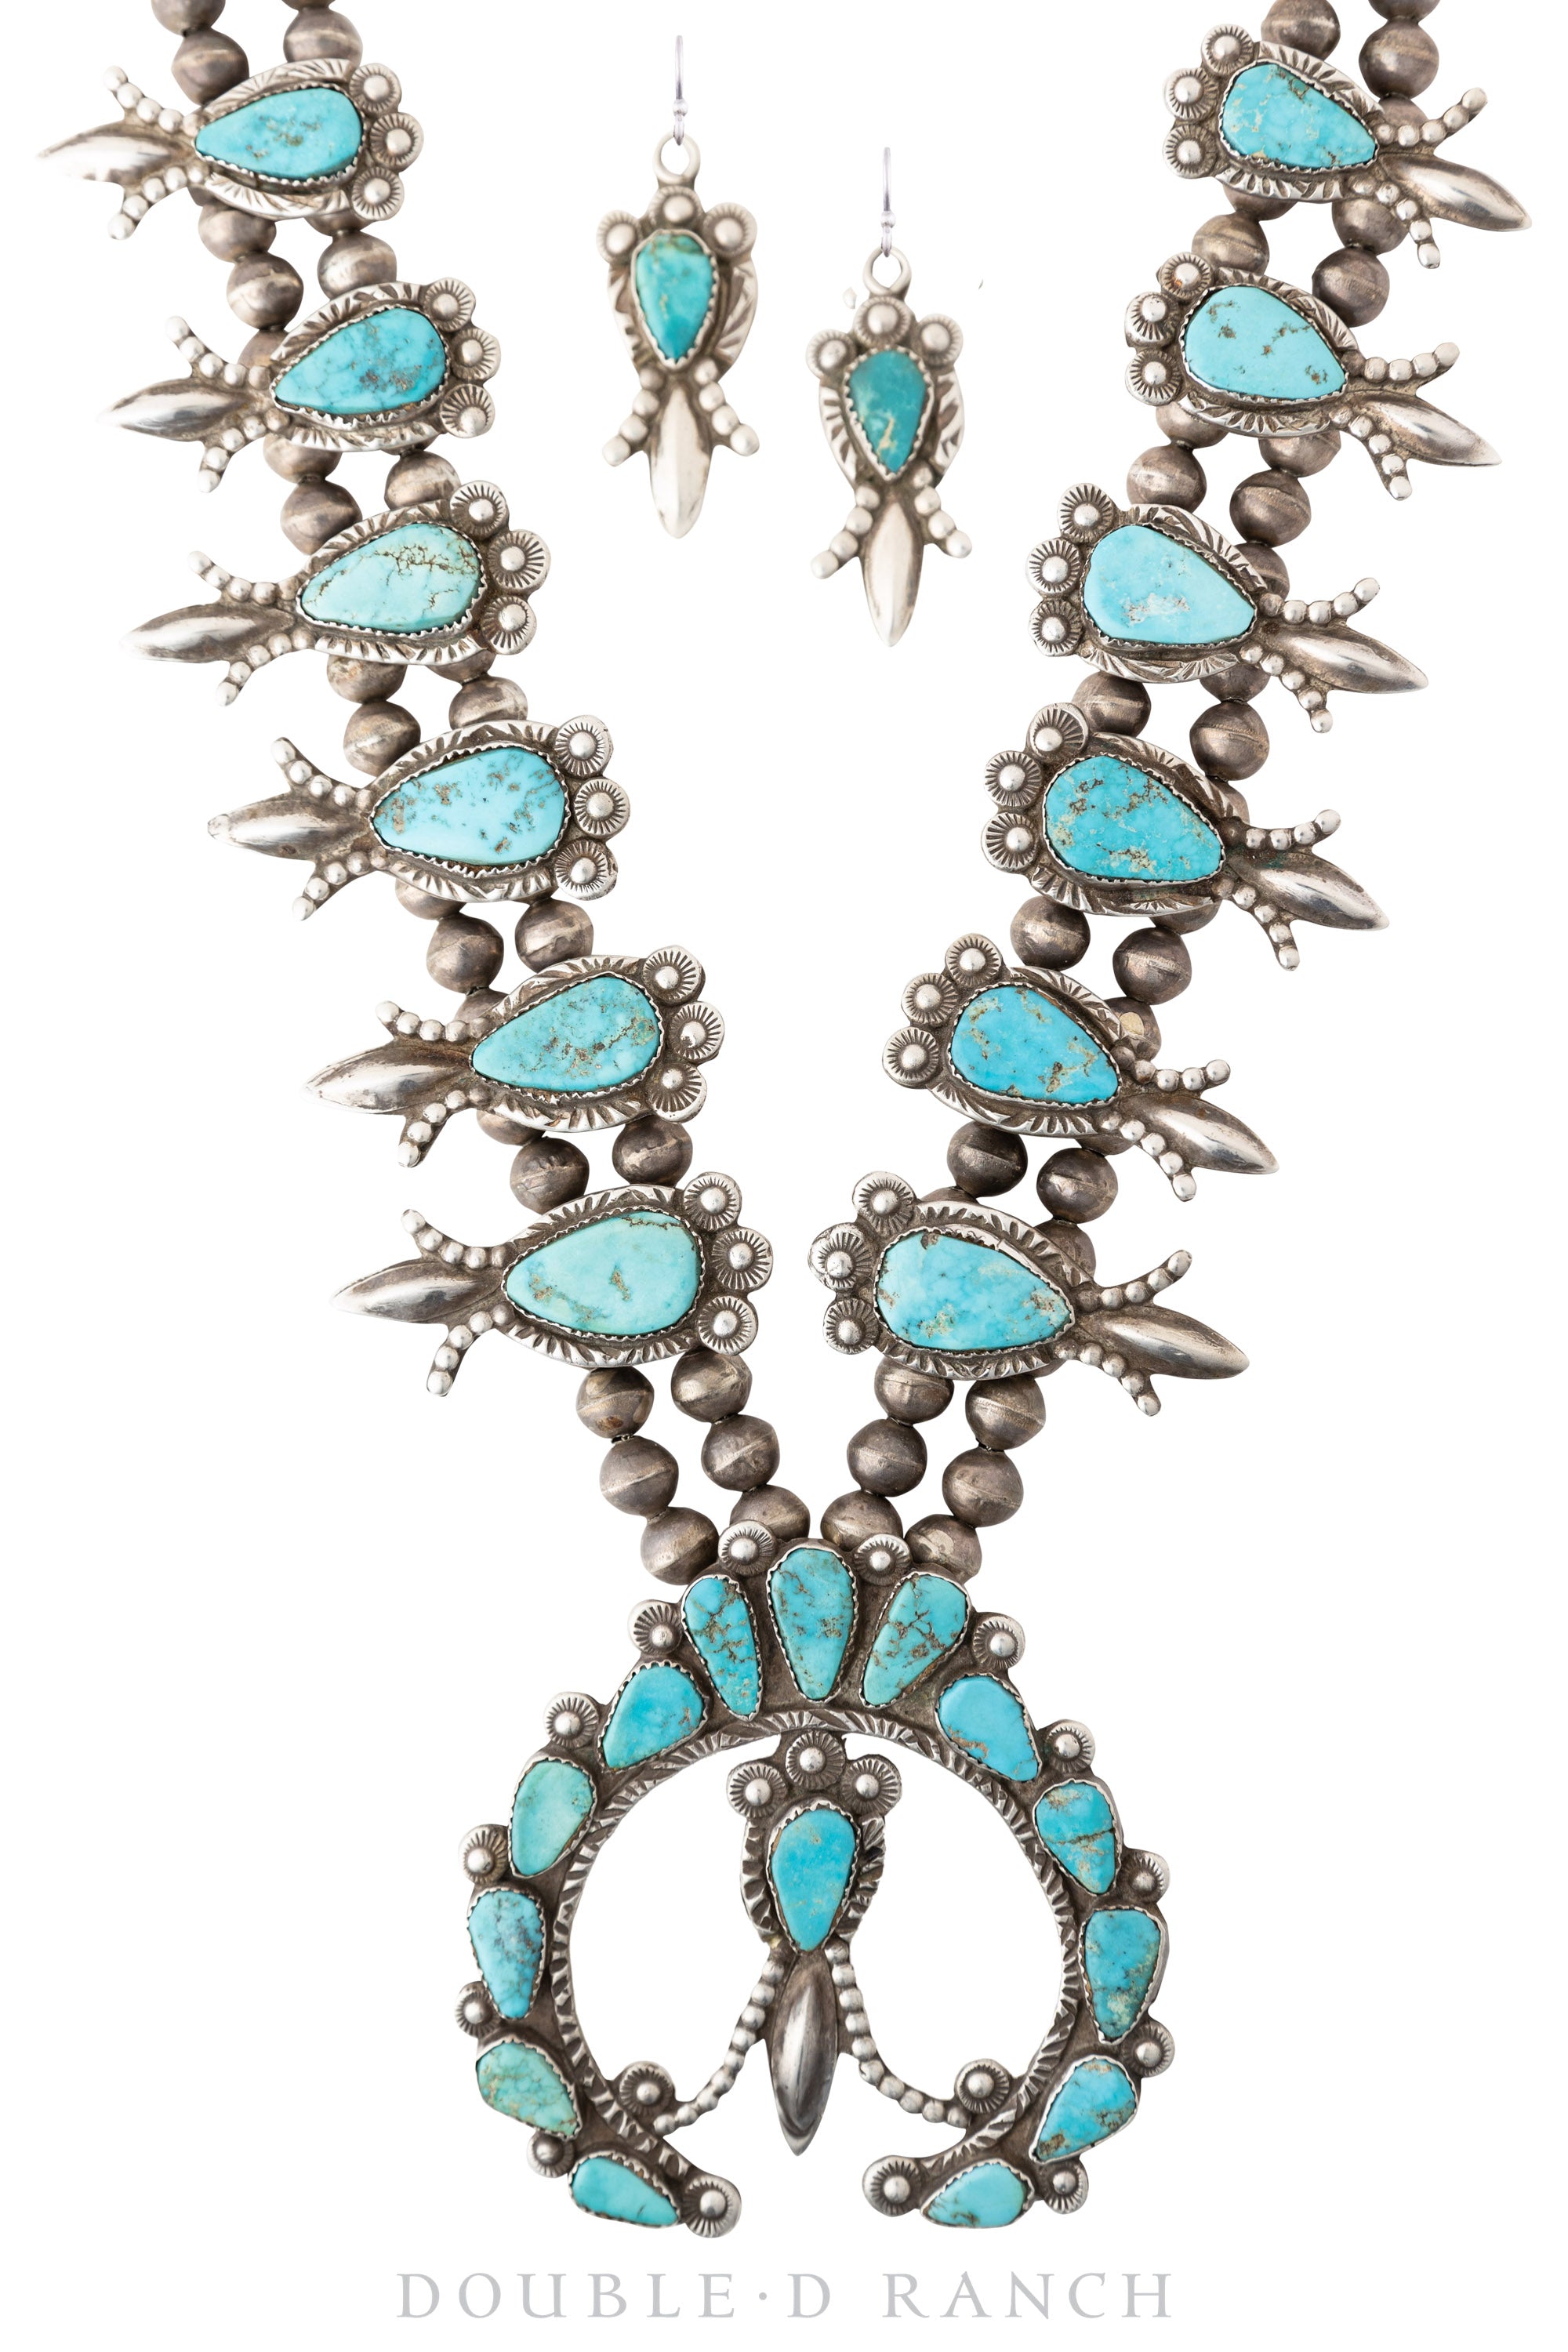 Necklace, Squash Blossom, Turquoise, Matching Earrings, Dan Simplicio Attribution, Vintage ‘50s, 1943